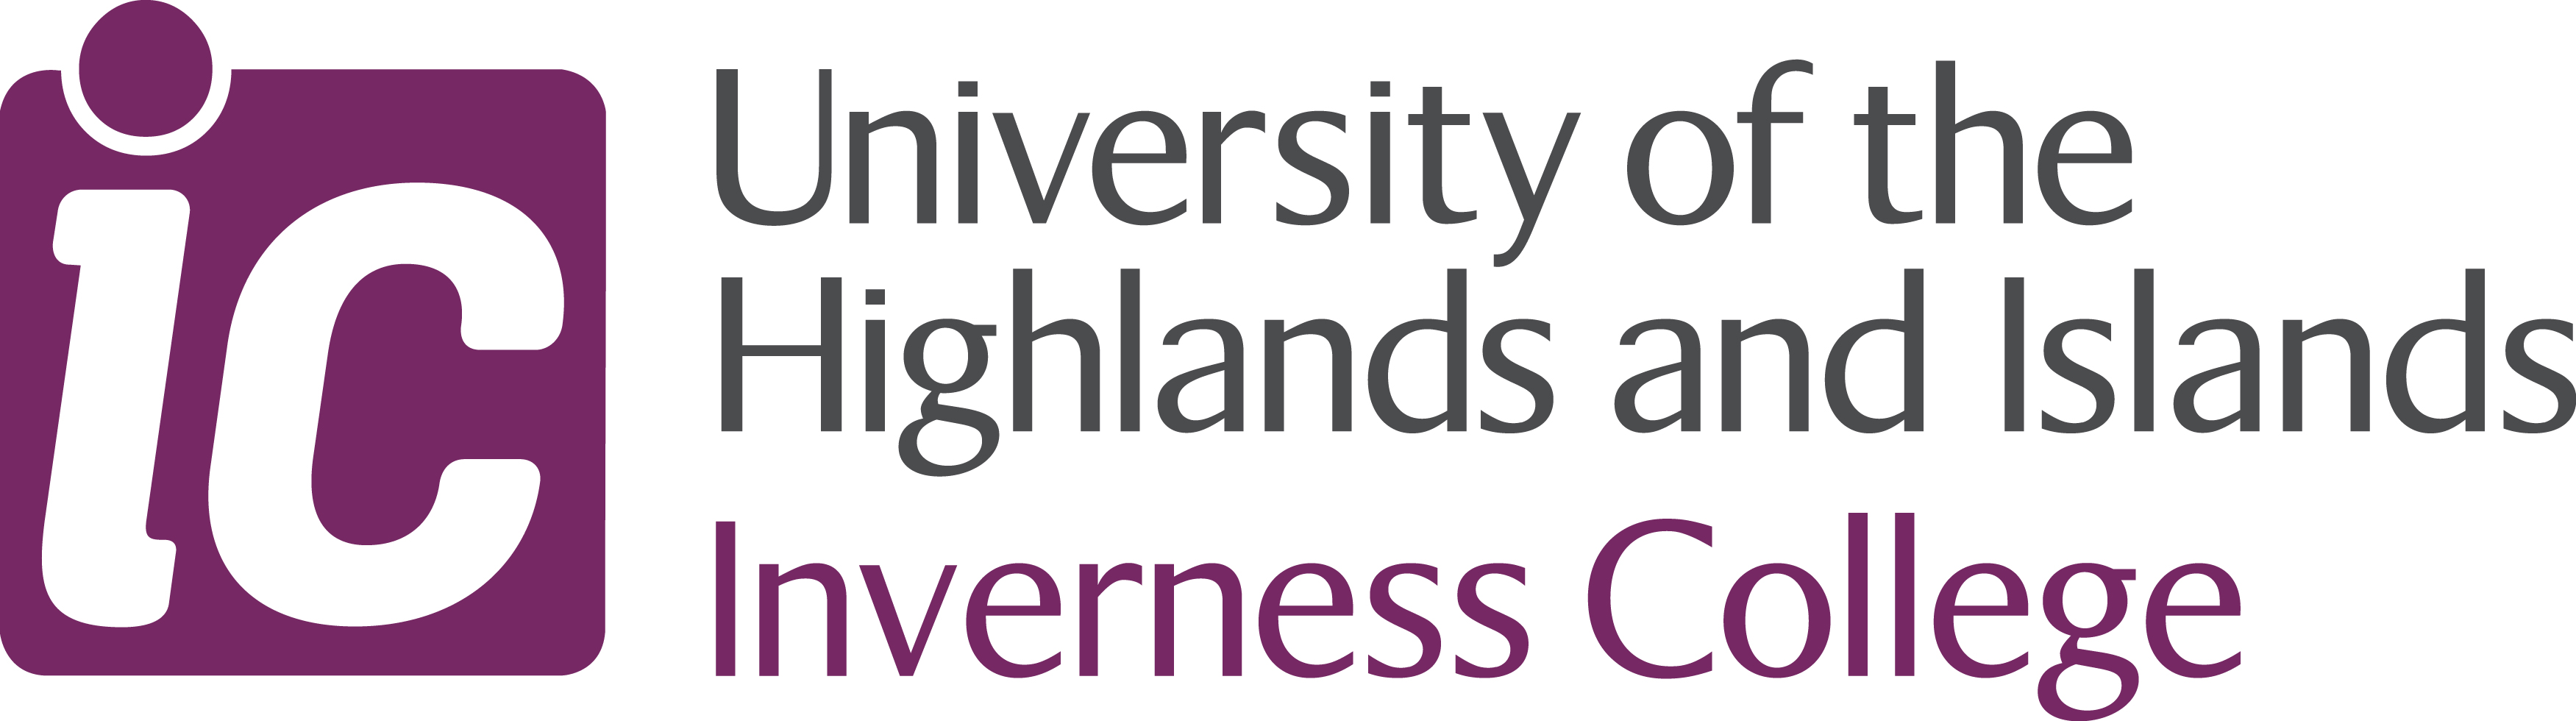 Inverness College UHI Board of Management seeks new Board members